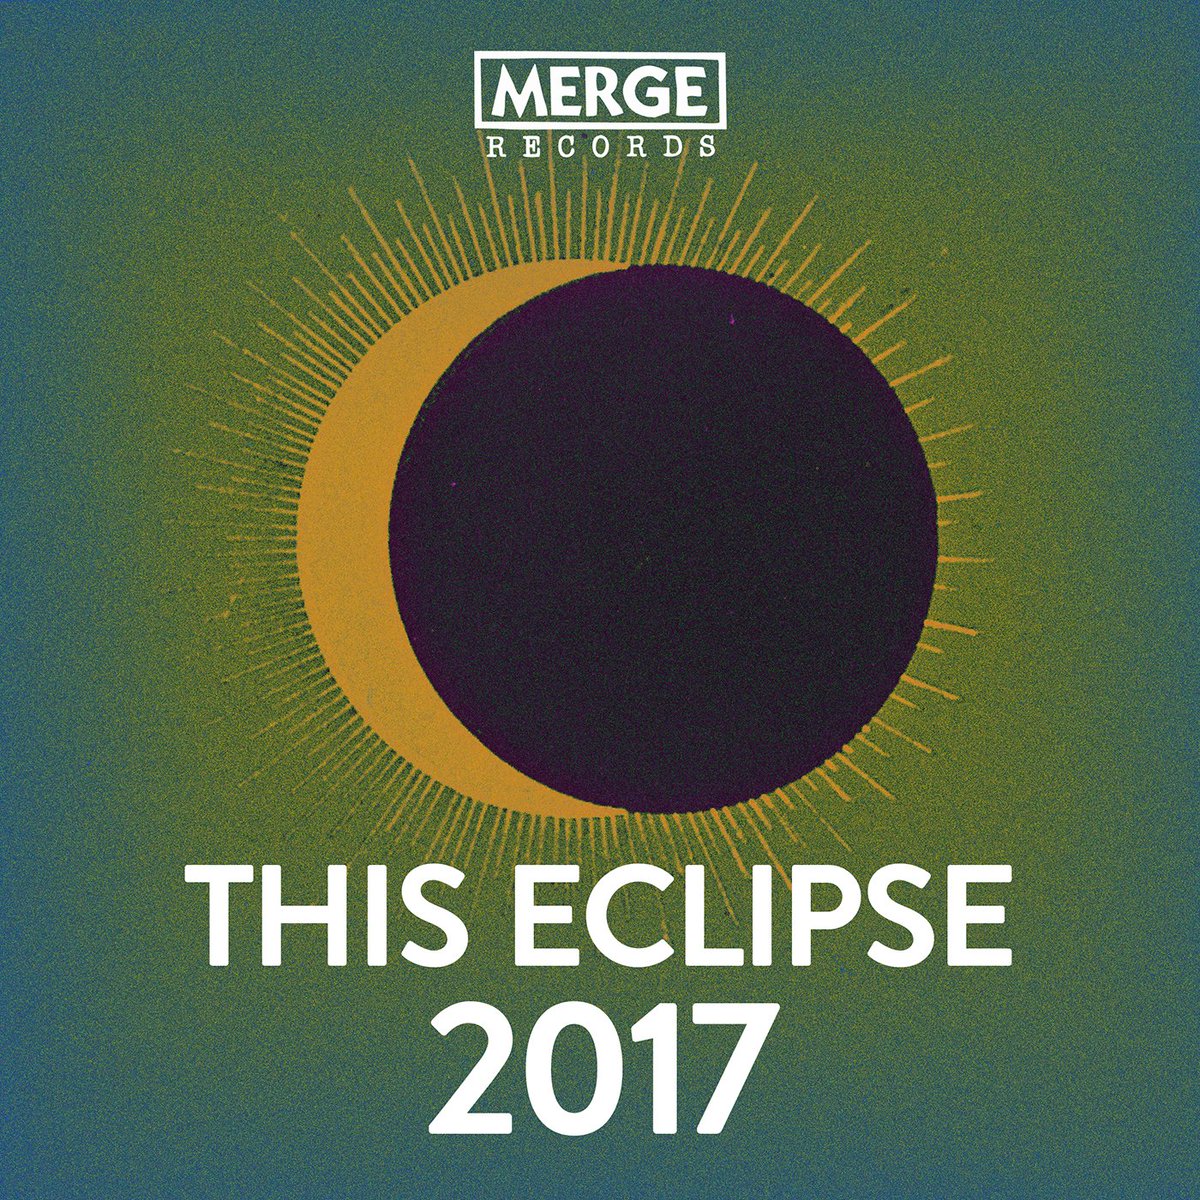 From the vault: perfect to accompany your eclipse activities, the 'This Eclipse 2017 by Laura Ballance' playlist has tracks like 'Lunar Days' by @theclientele, 'Here Comes the Sun Again' by @mwardtweeting, and more! ☀️ lnk.bio/mergerecords #solareclipse2024 #eclipsesolar2024